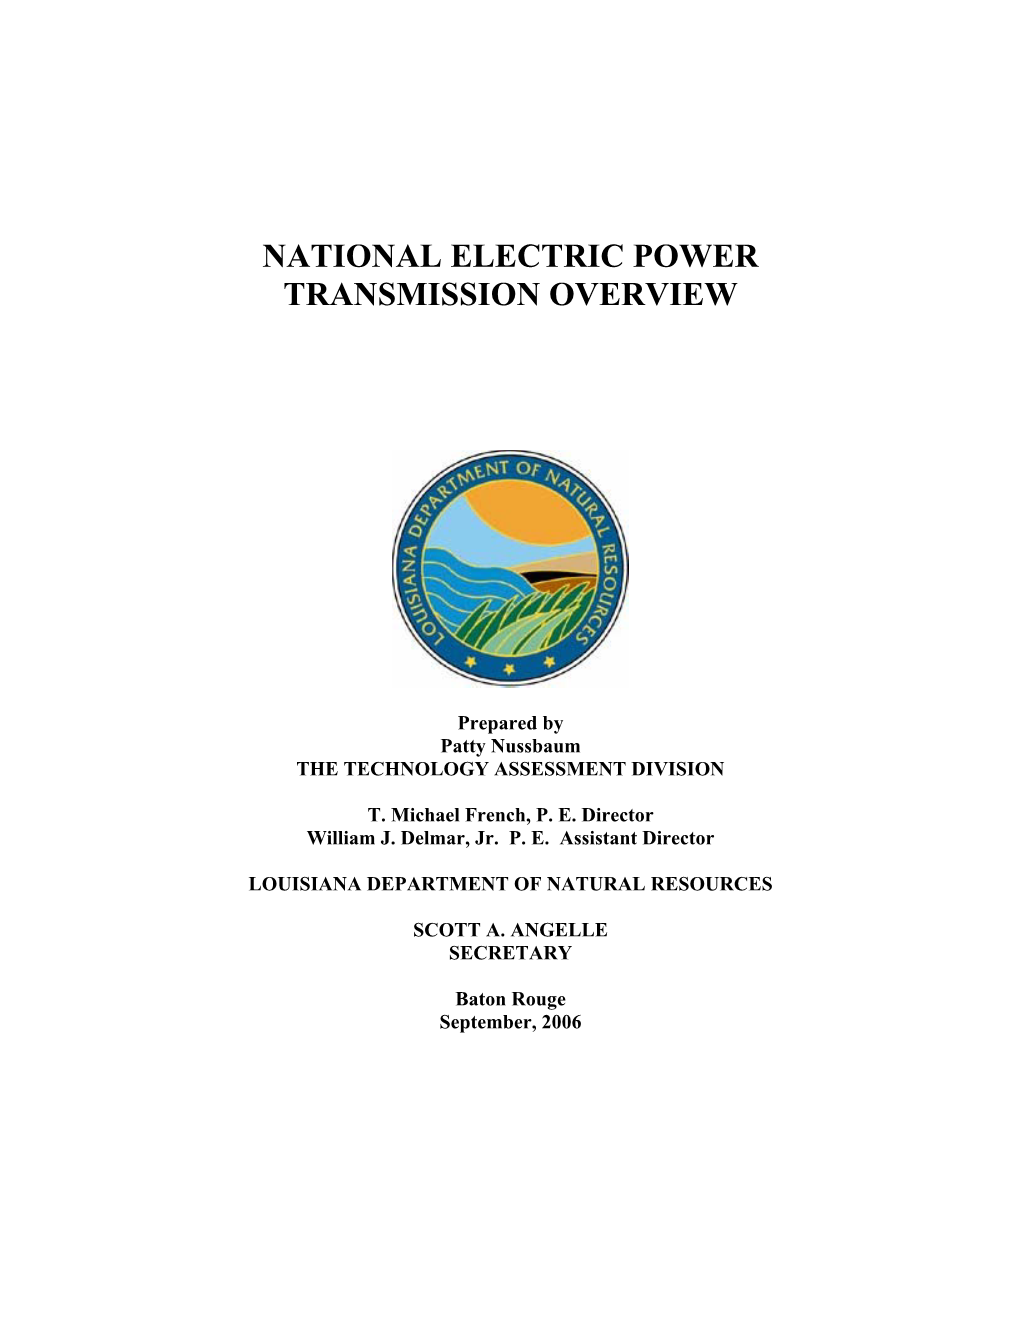 National Electric Power Transmission Overview